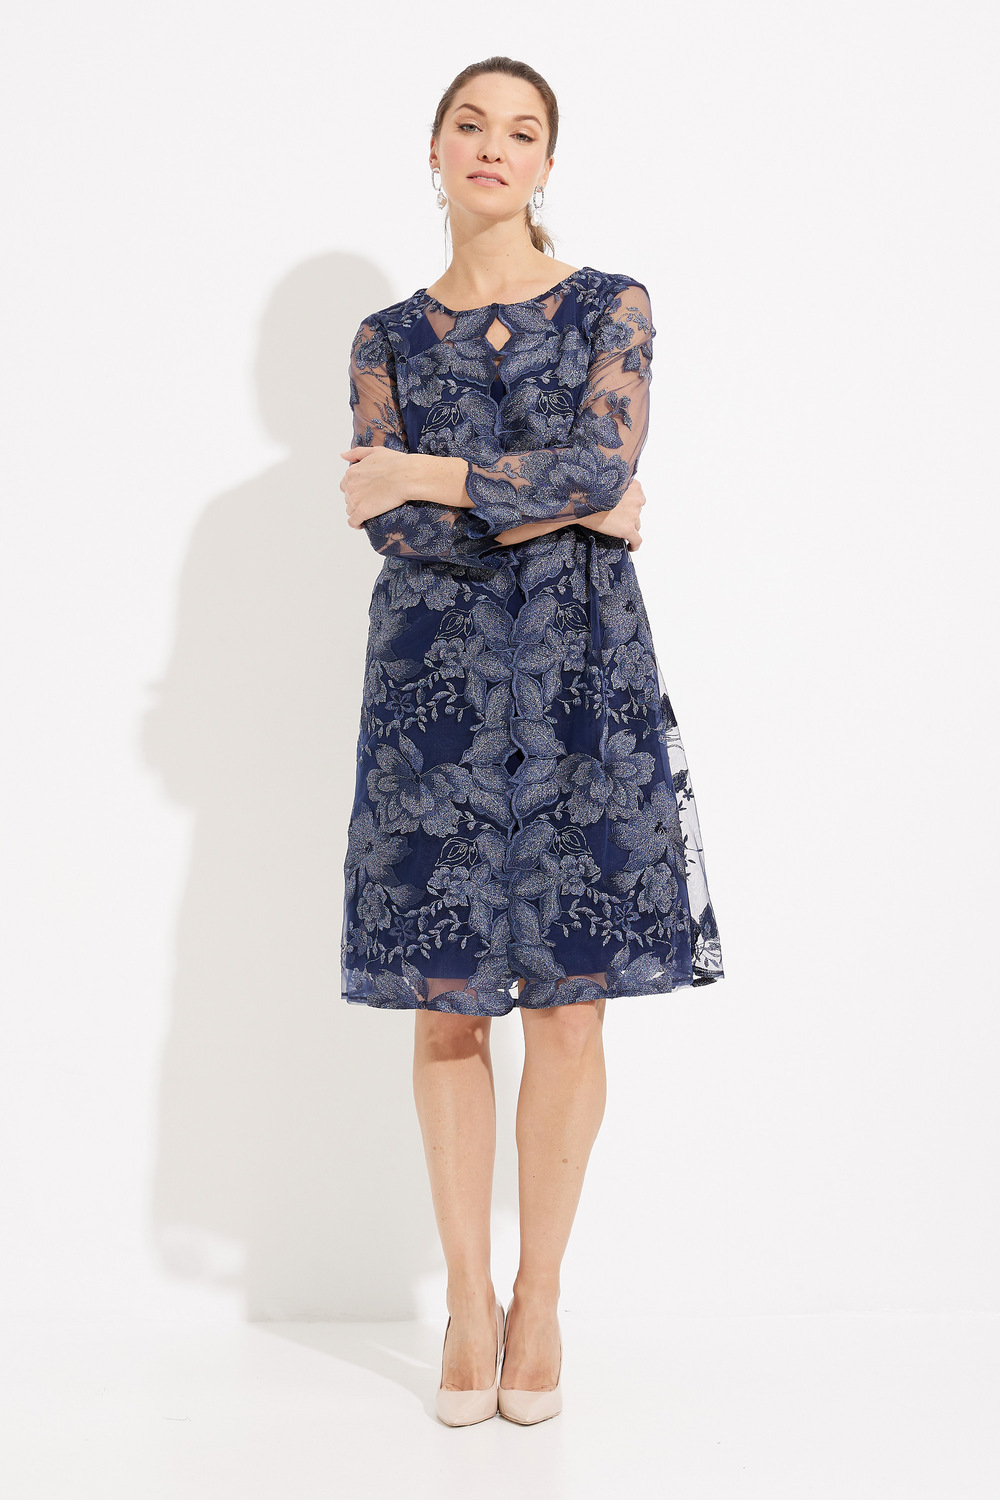 Embroidered Lace Jacket with Jersey Dress Style 81122202. Navy